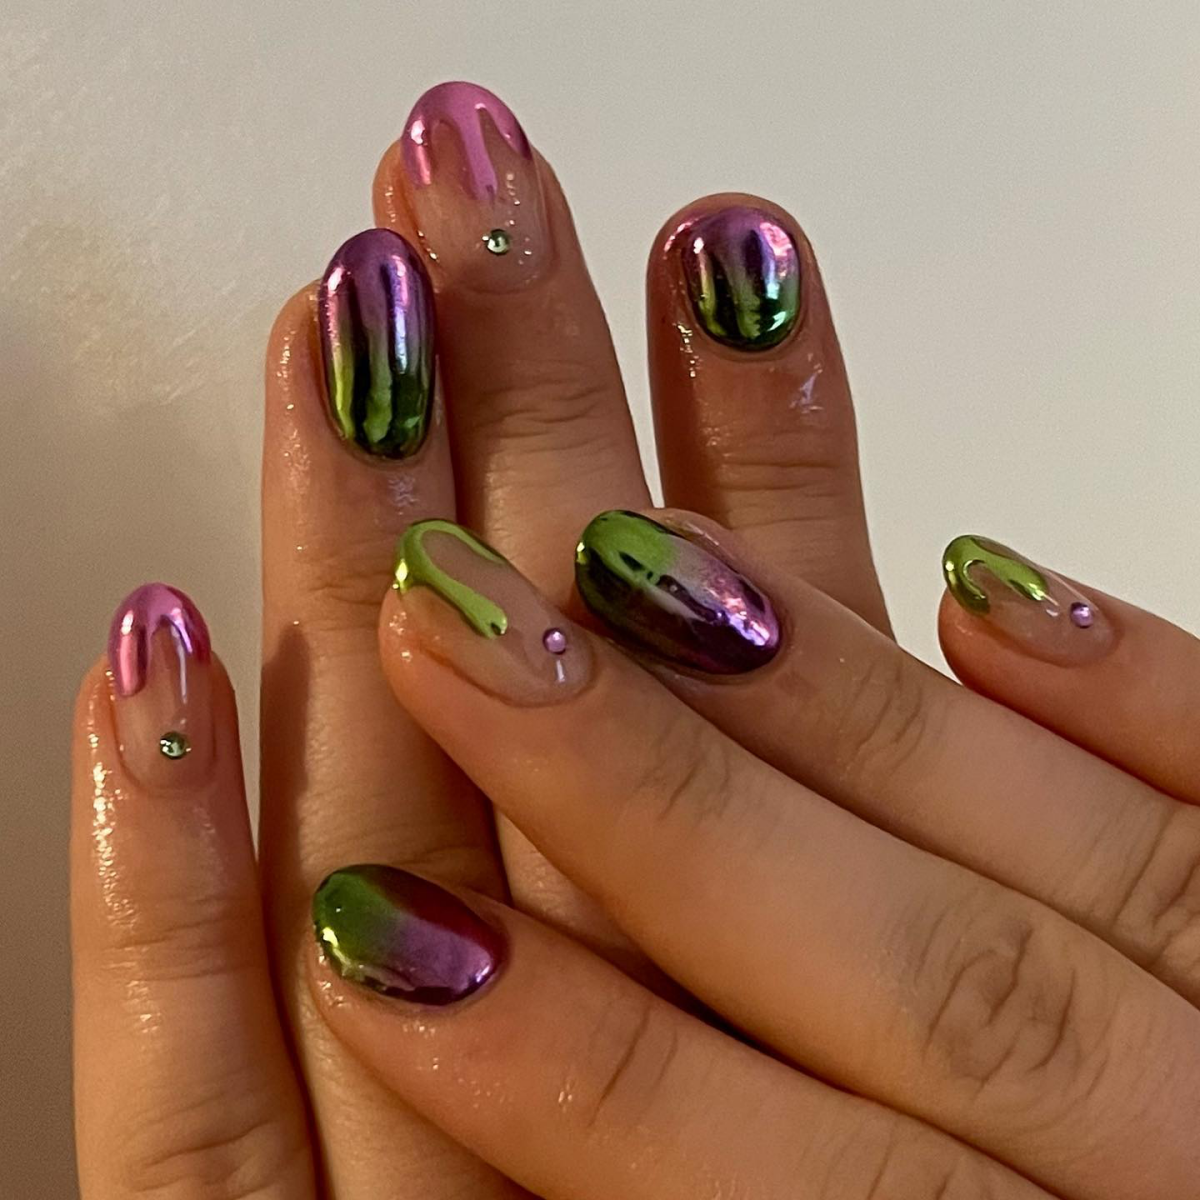 green and purple chrome nails